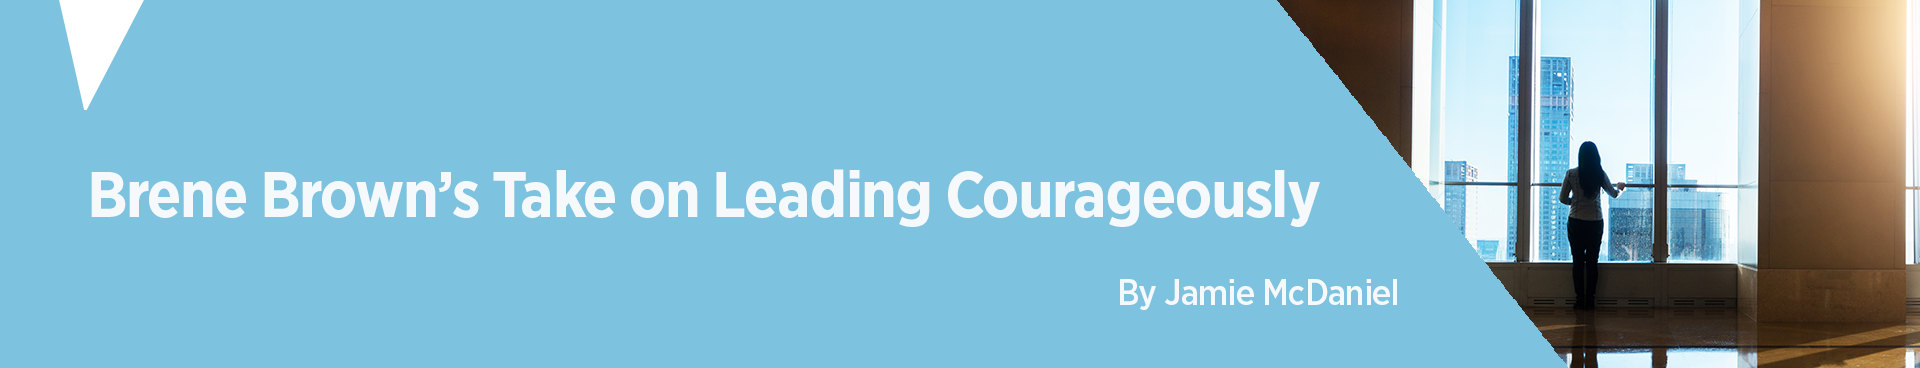 leading courageously article